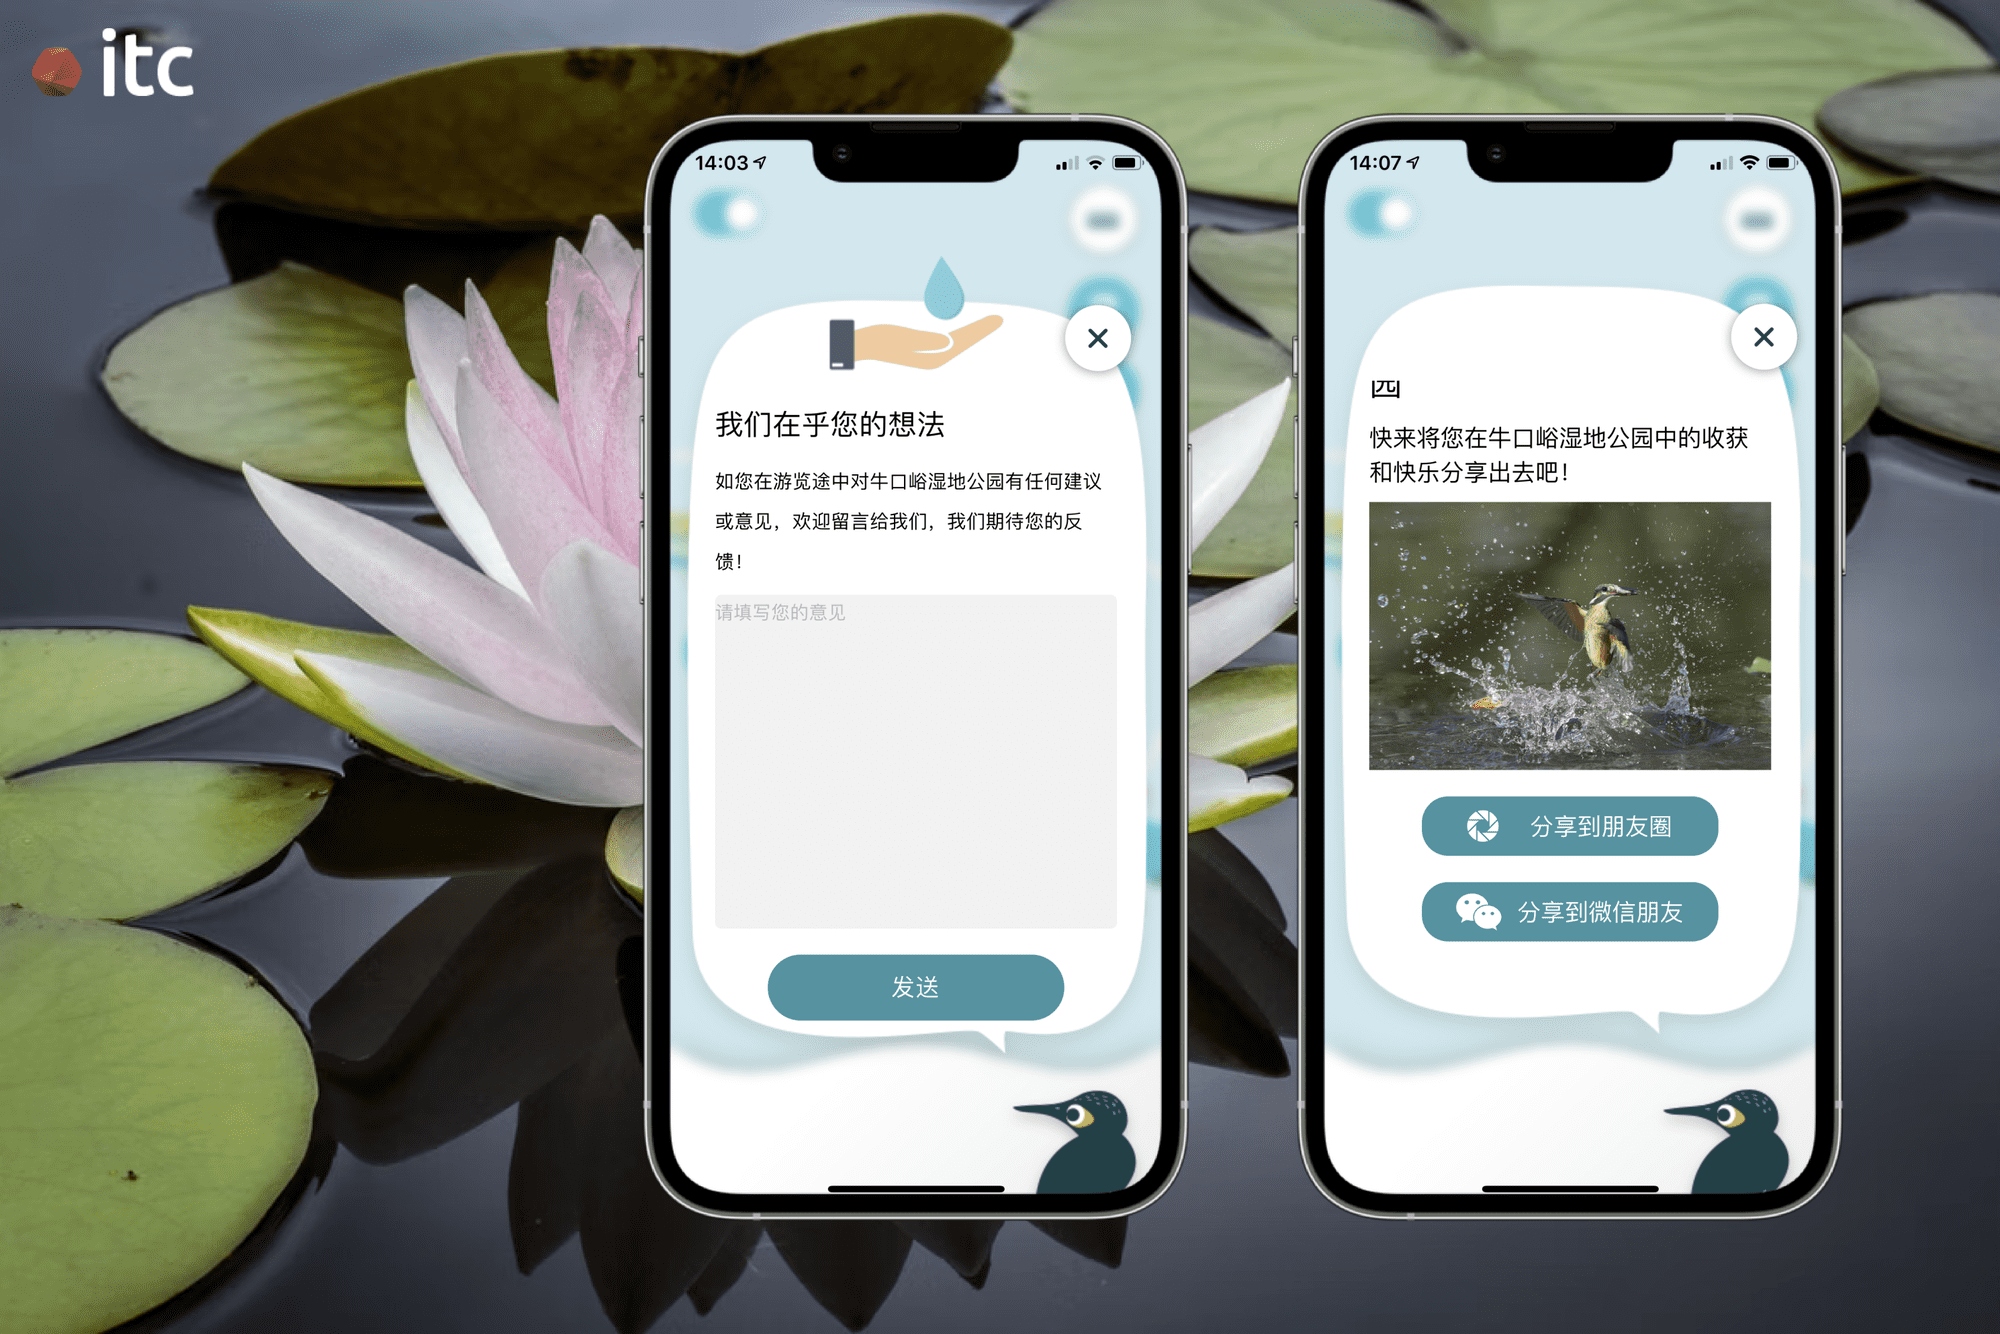 Users can write feedback (left) and share their experience at the Wetland Park with their friends on WeChat (right)